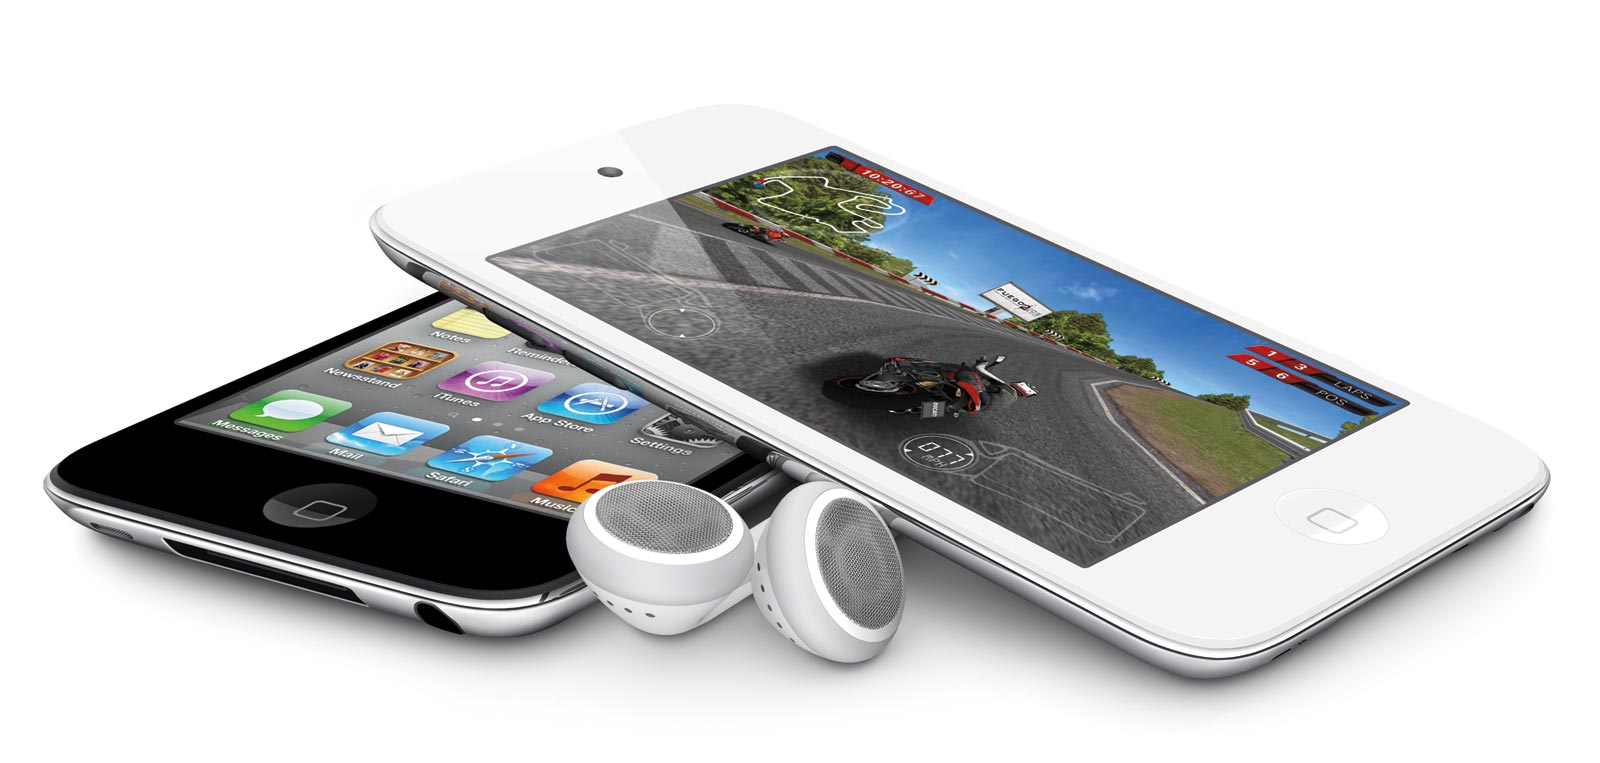 iPhoneRoot.com » White iPod Touch 4G will be available October 12th » Print